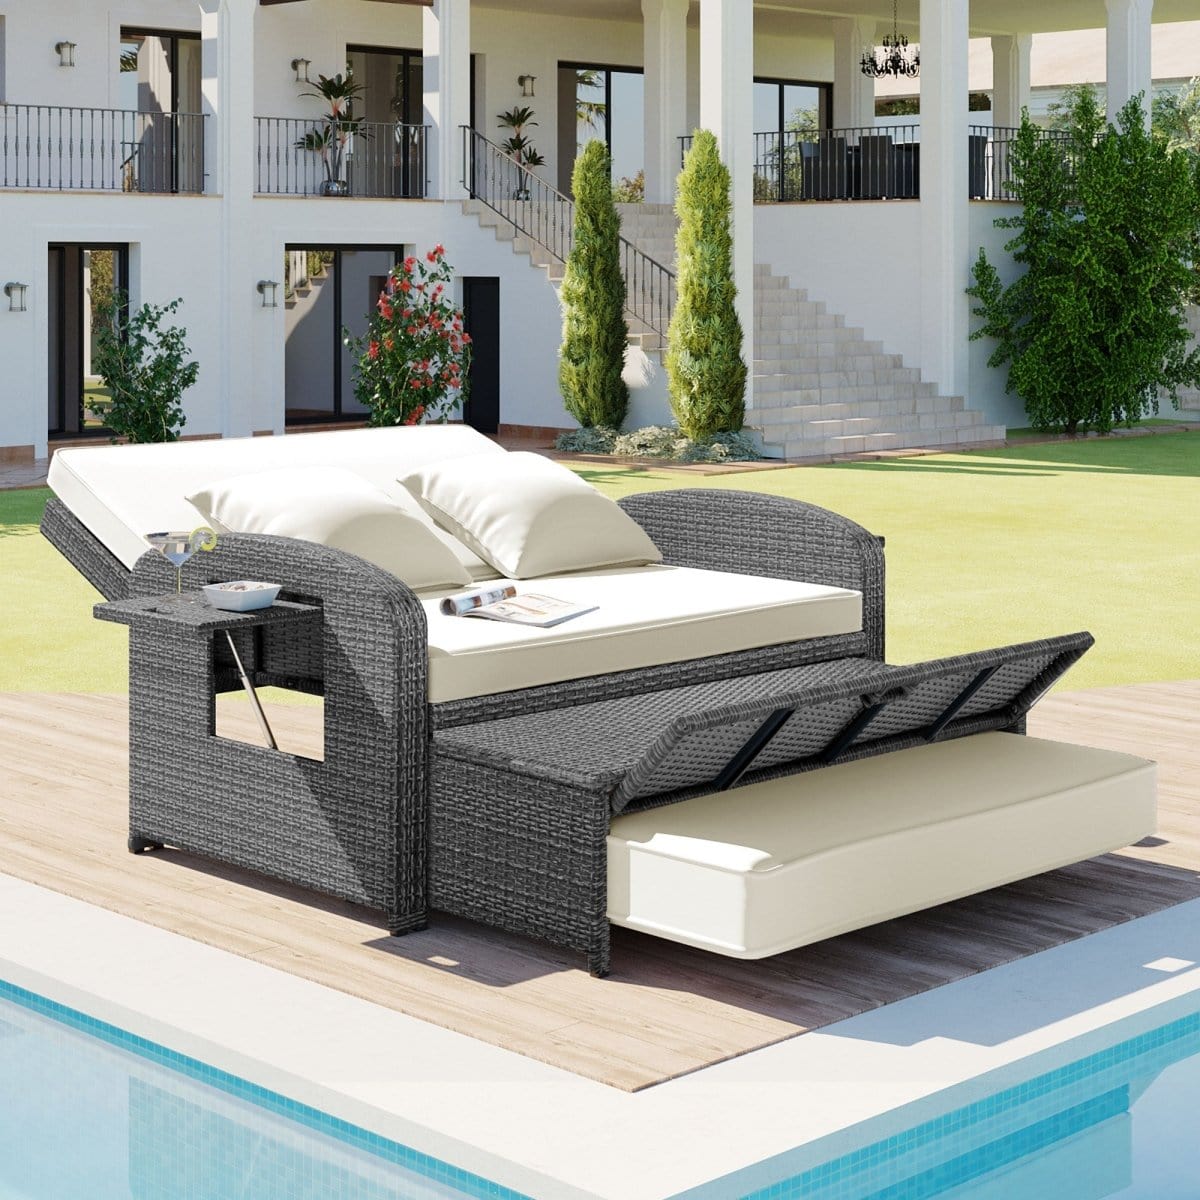 2 Person Outdoor Daybed with Built-in Tables2Topmaxx